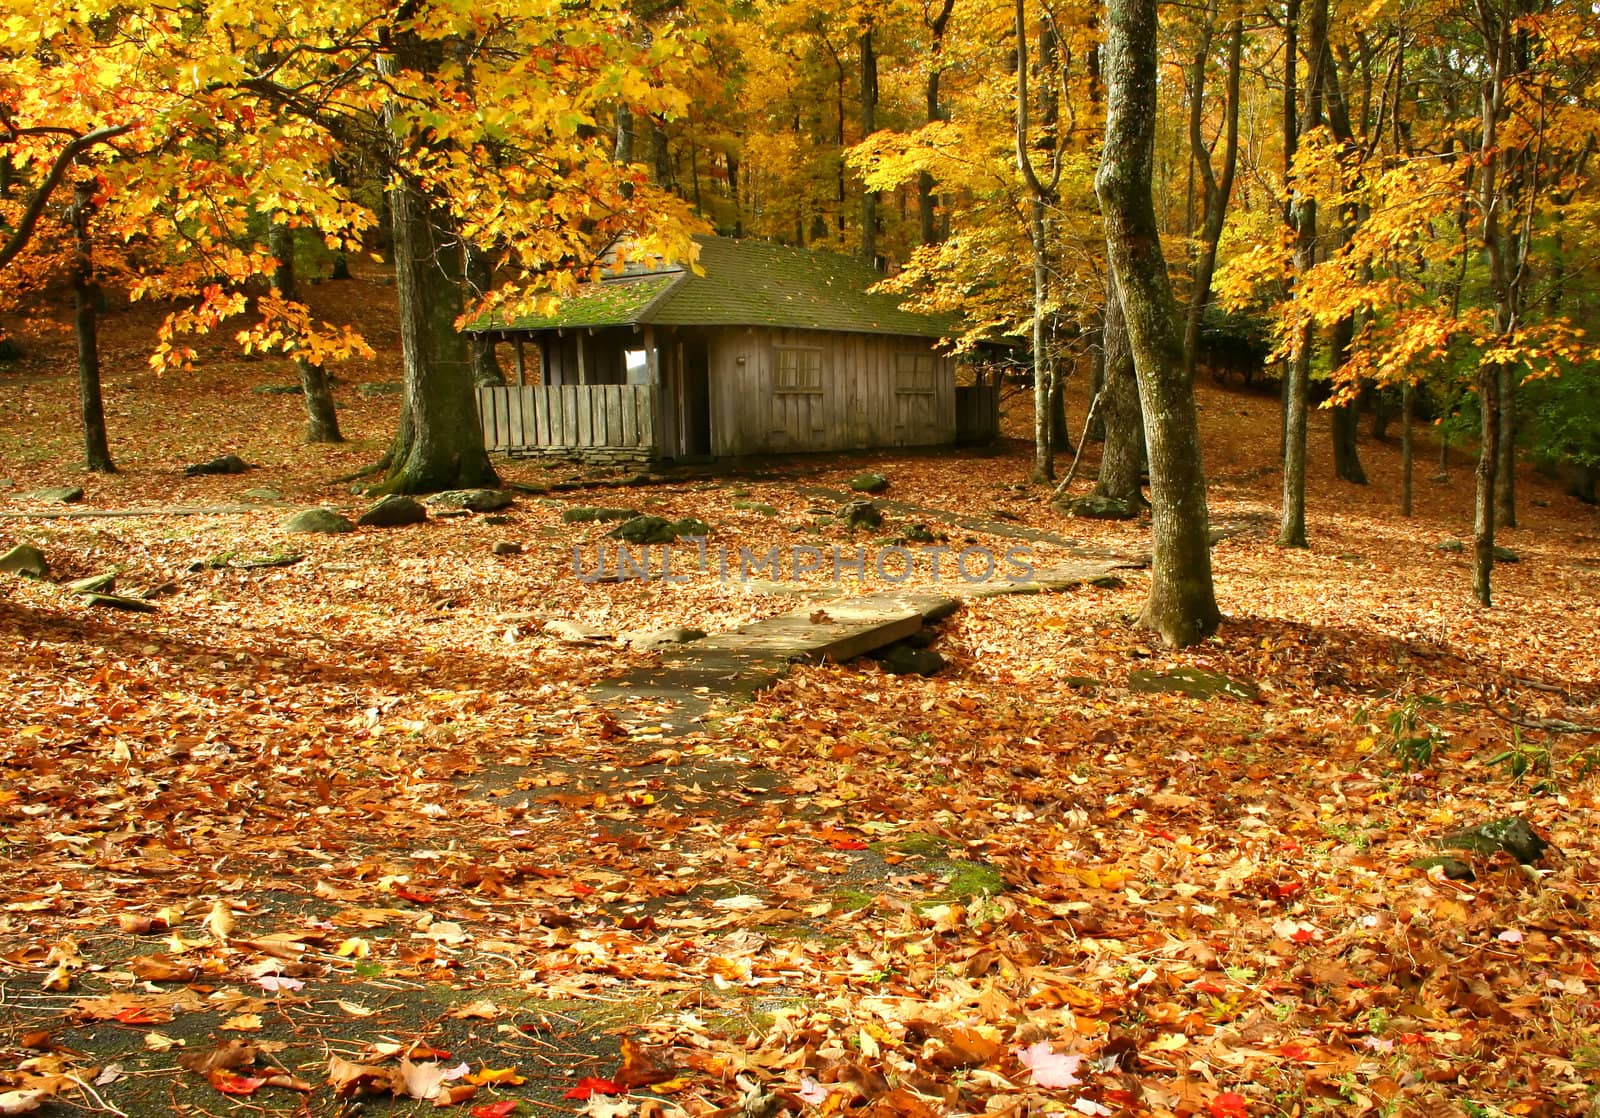 Fall image in the woods with restrooms

